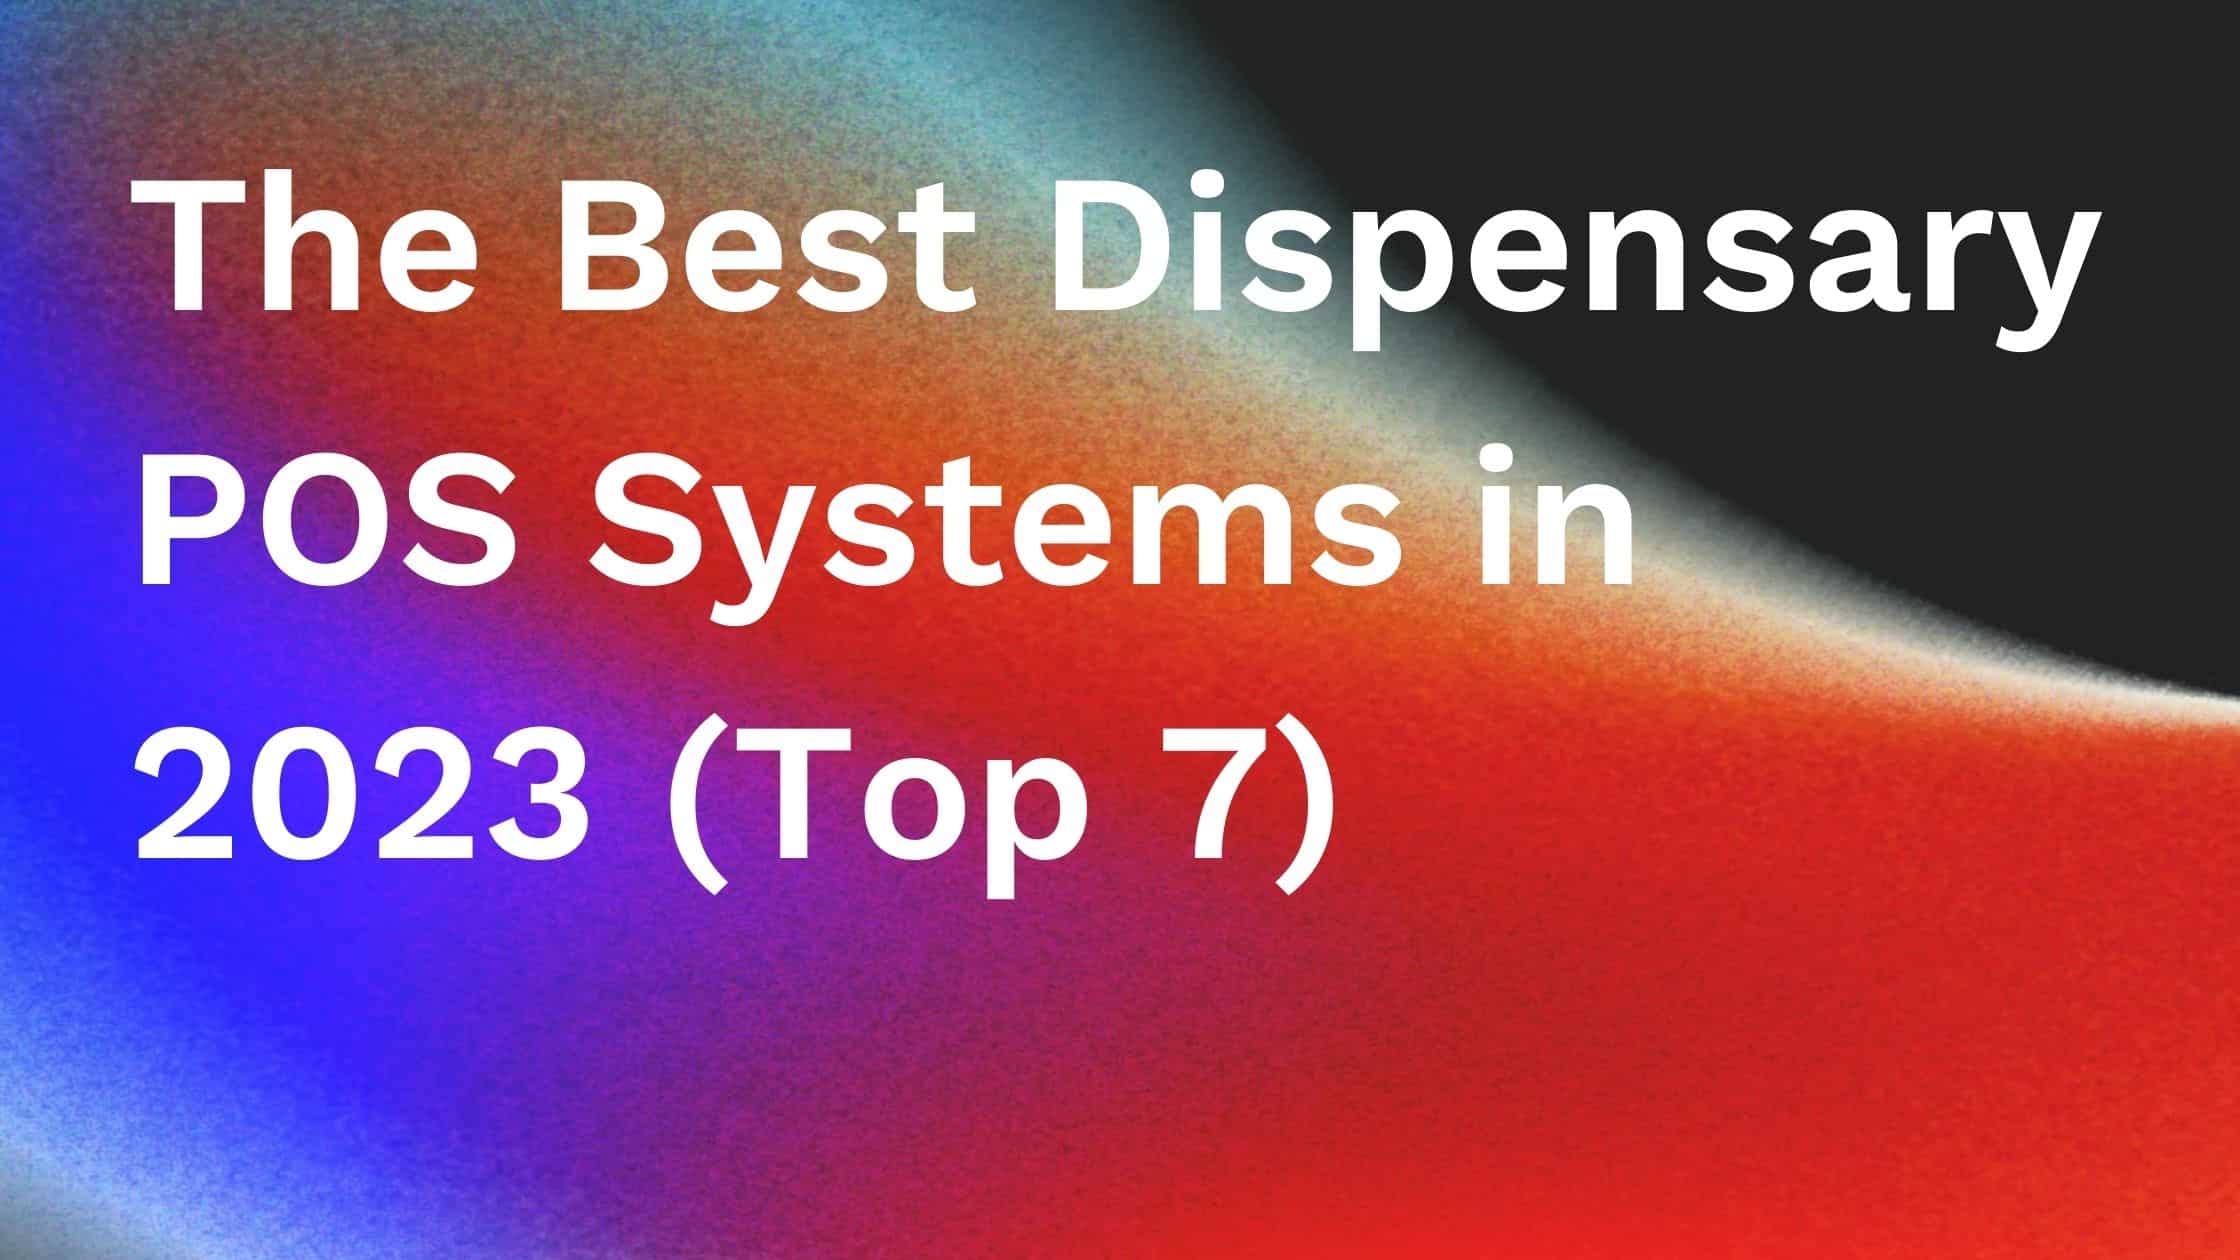 The Best Dispensary POS Systems in 2023 (Top 7)